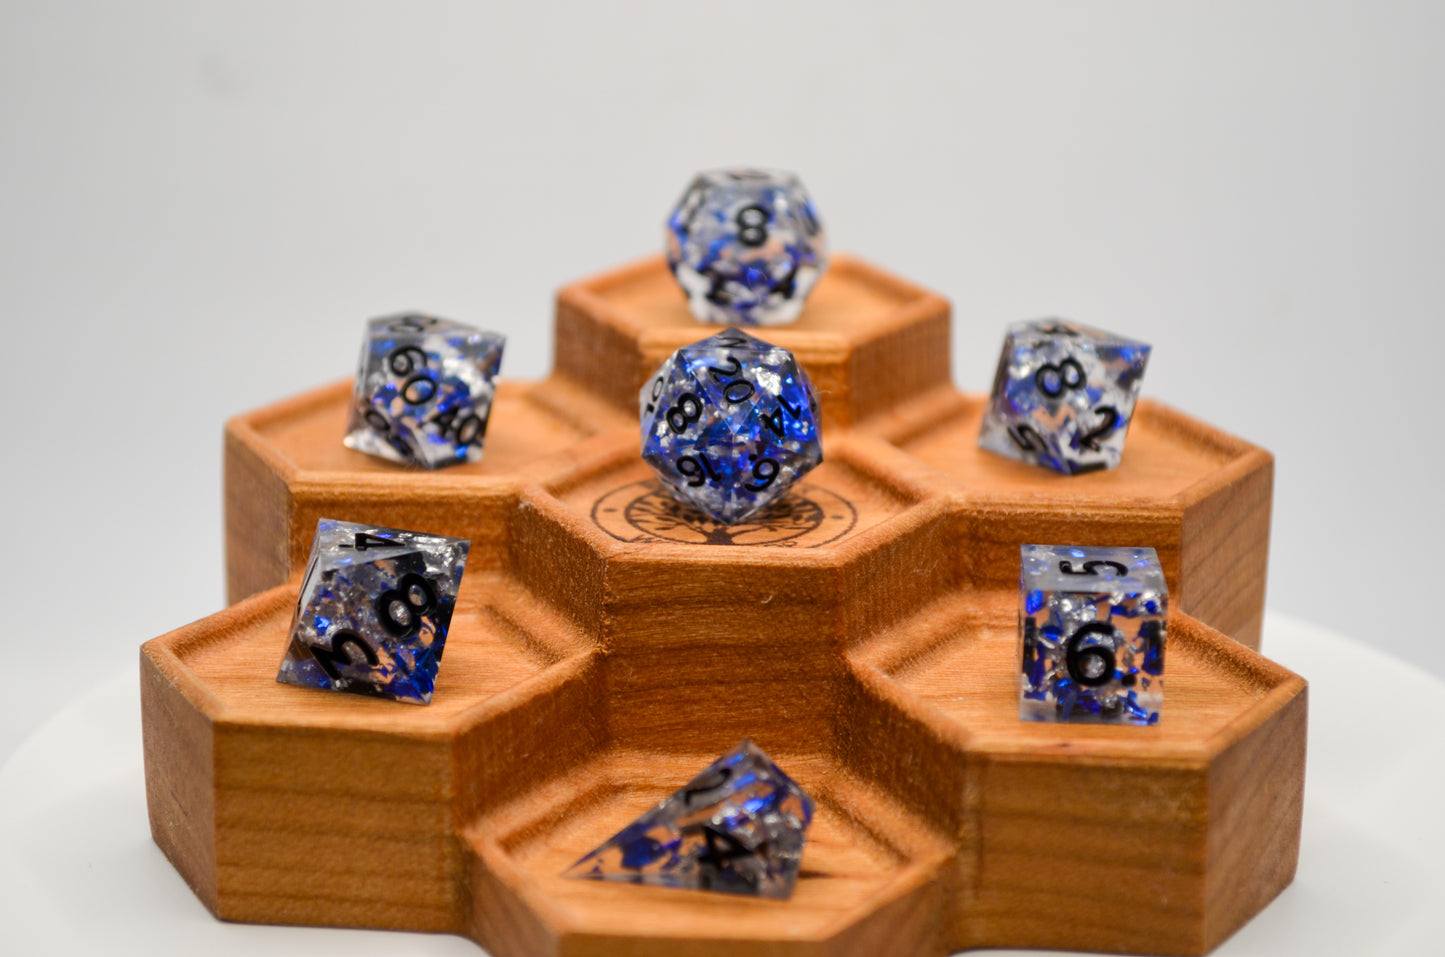 Silver and Sapphire Flakes Mini 7 Piece Dice Set